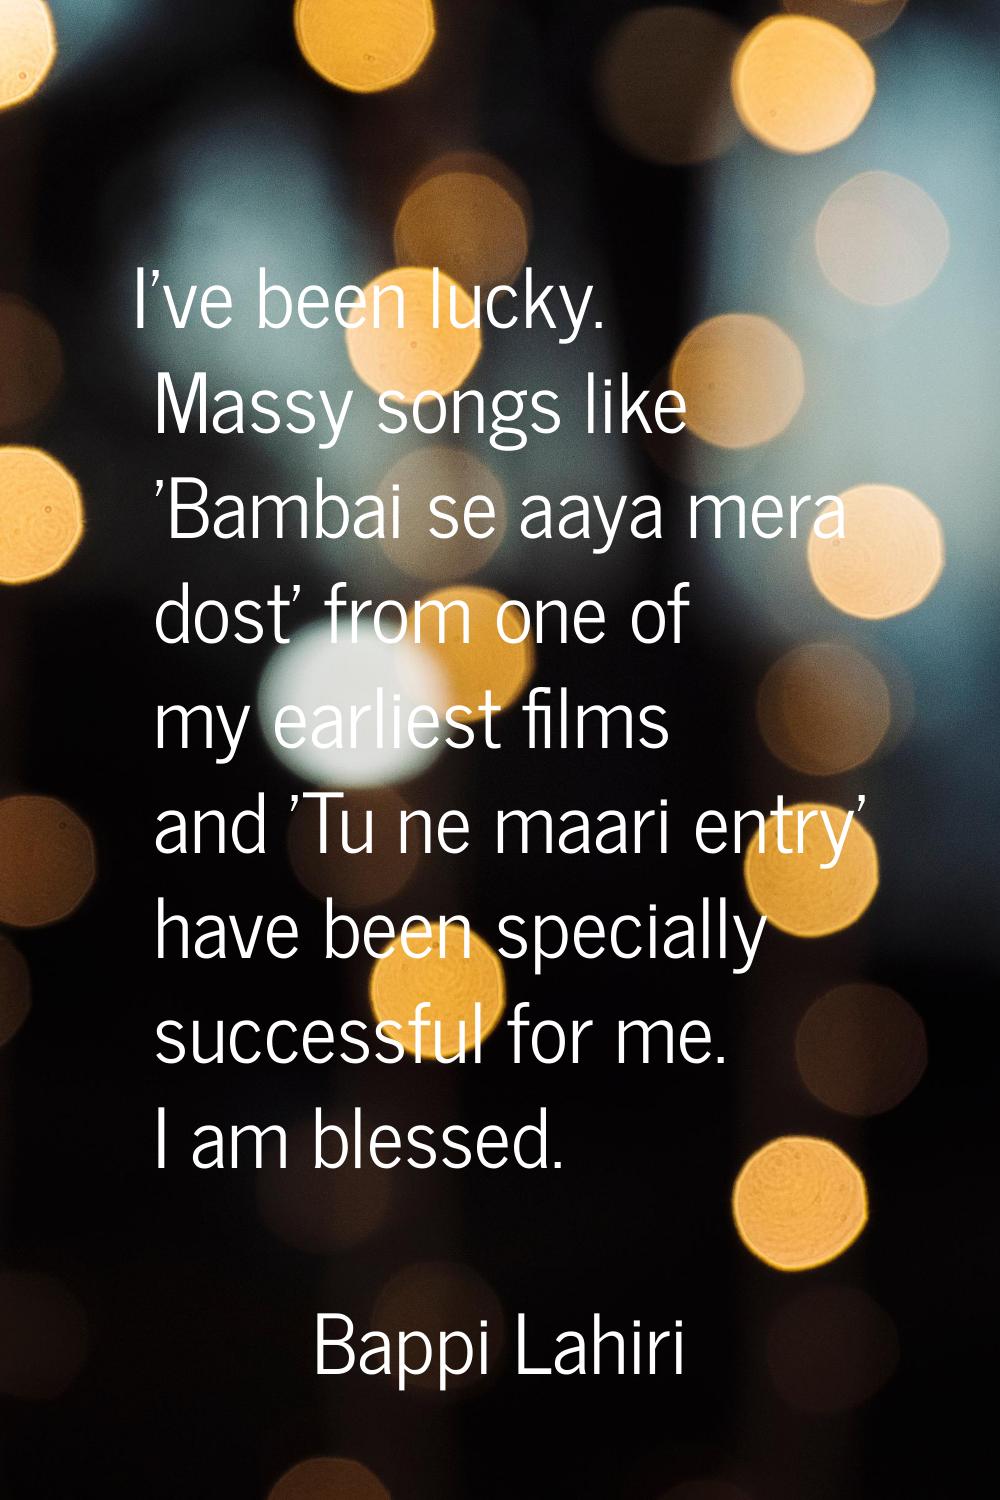 I've been lucky. Massy songs like 'Bambai se aaya mera dost' from one of my earliest films and 'Tu 